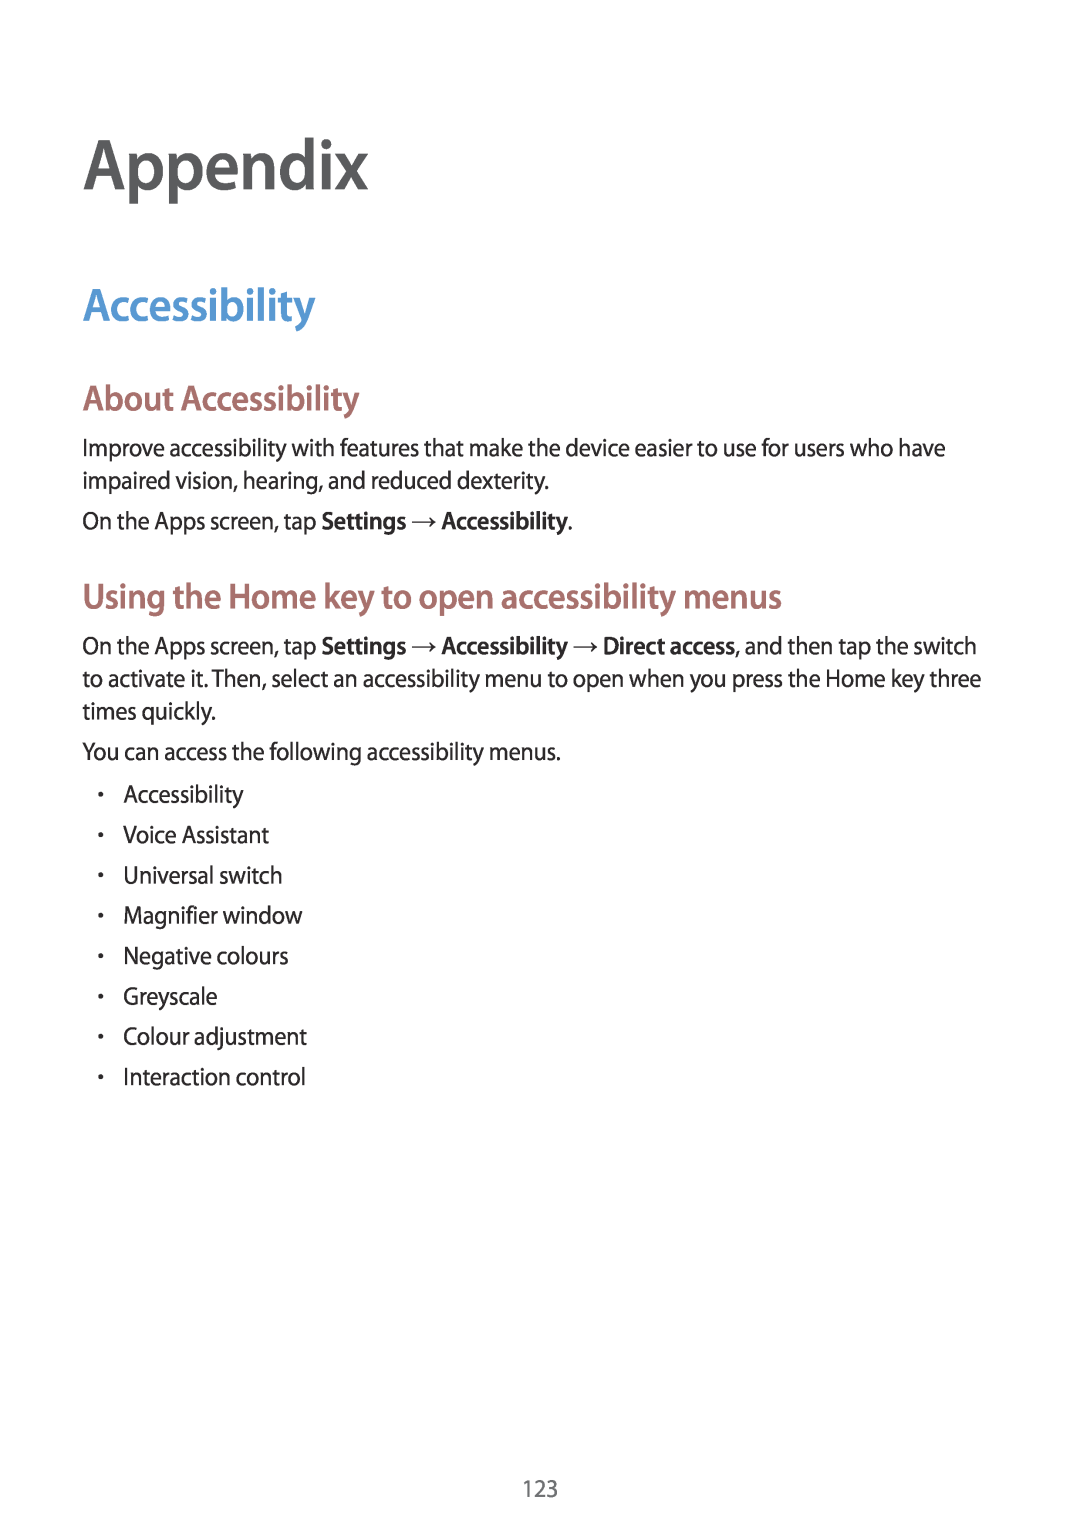 Samsung SM-G920FZKAILO, SM-G920FZKFDBT manual Appendix, About Accessibility, Using the Home key to open accessibility menus 